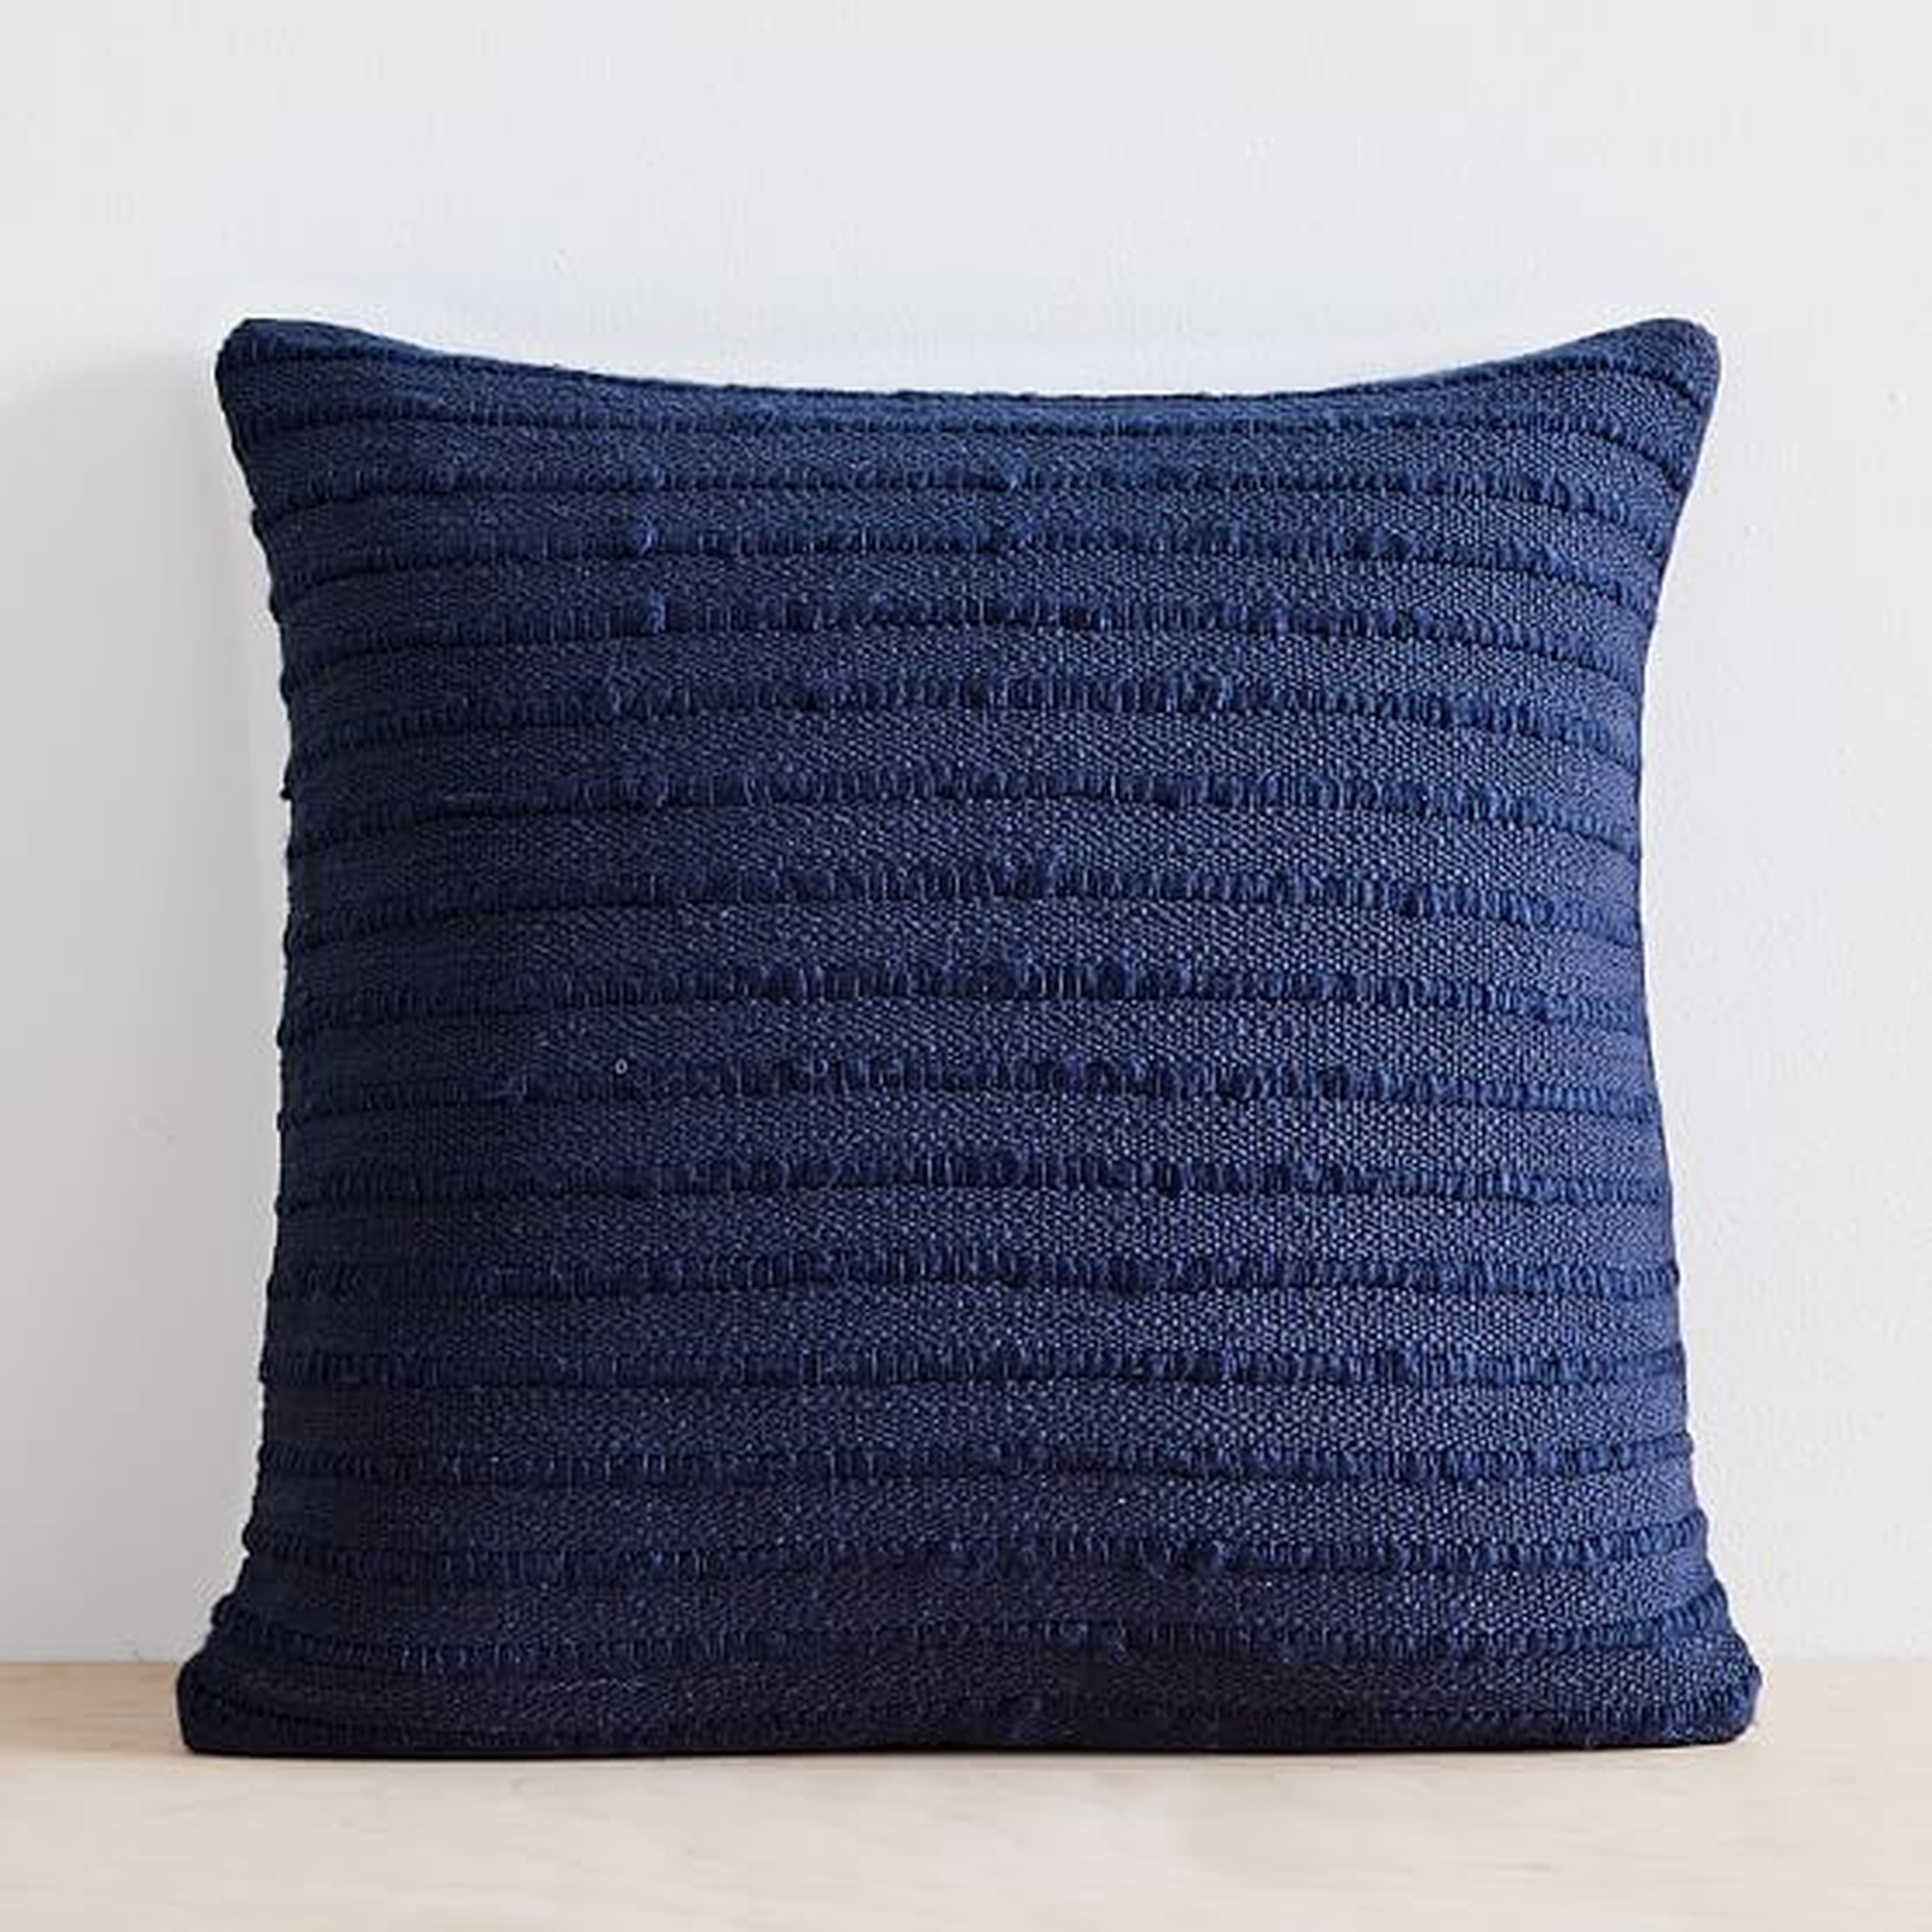 Soft Corded Pillow Cover with Down Alternative Insert, Midnight, 20"x20" - West Elm